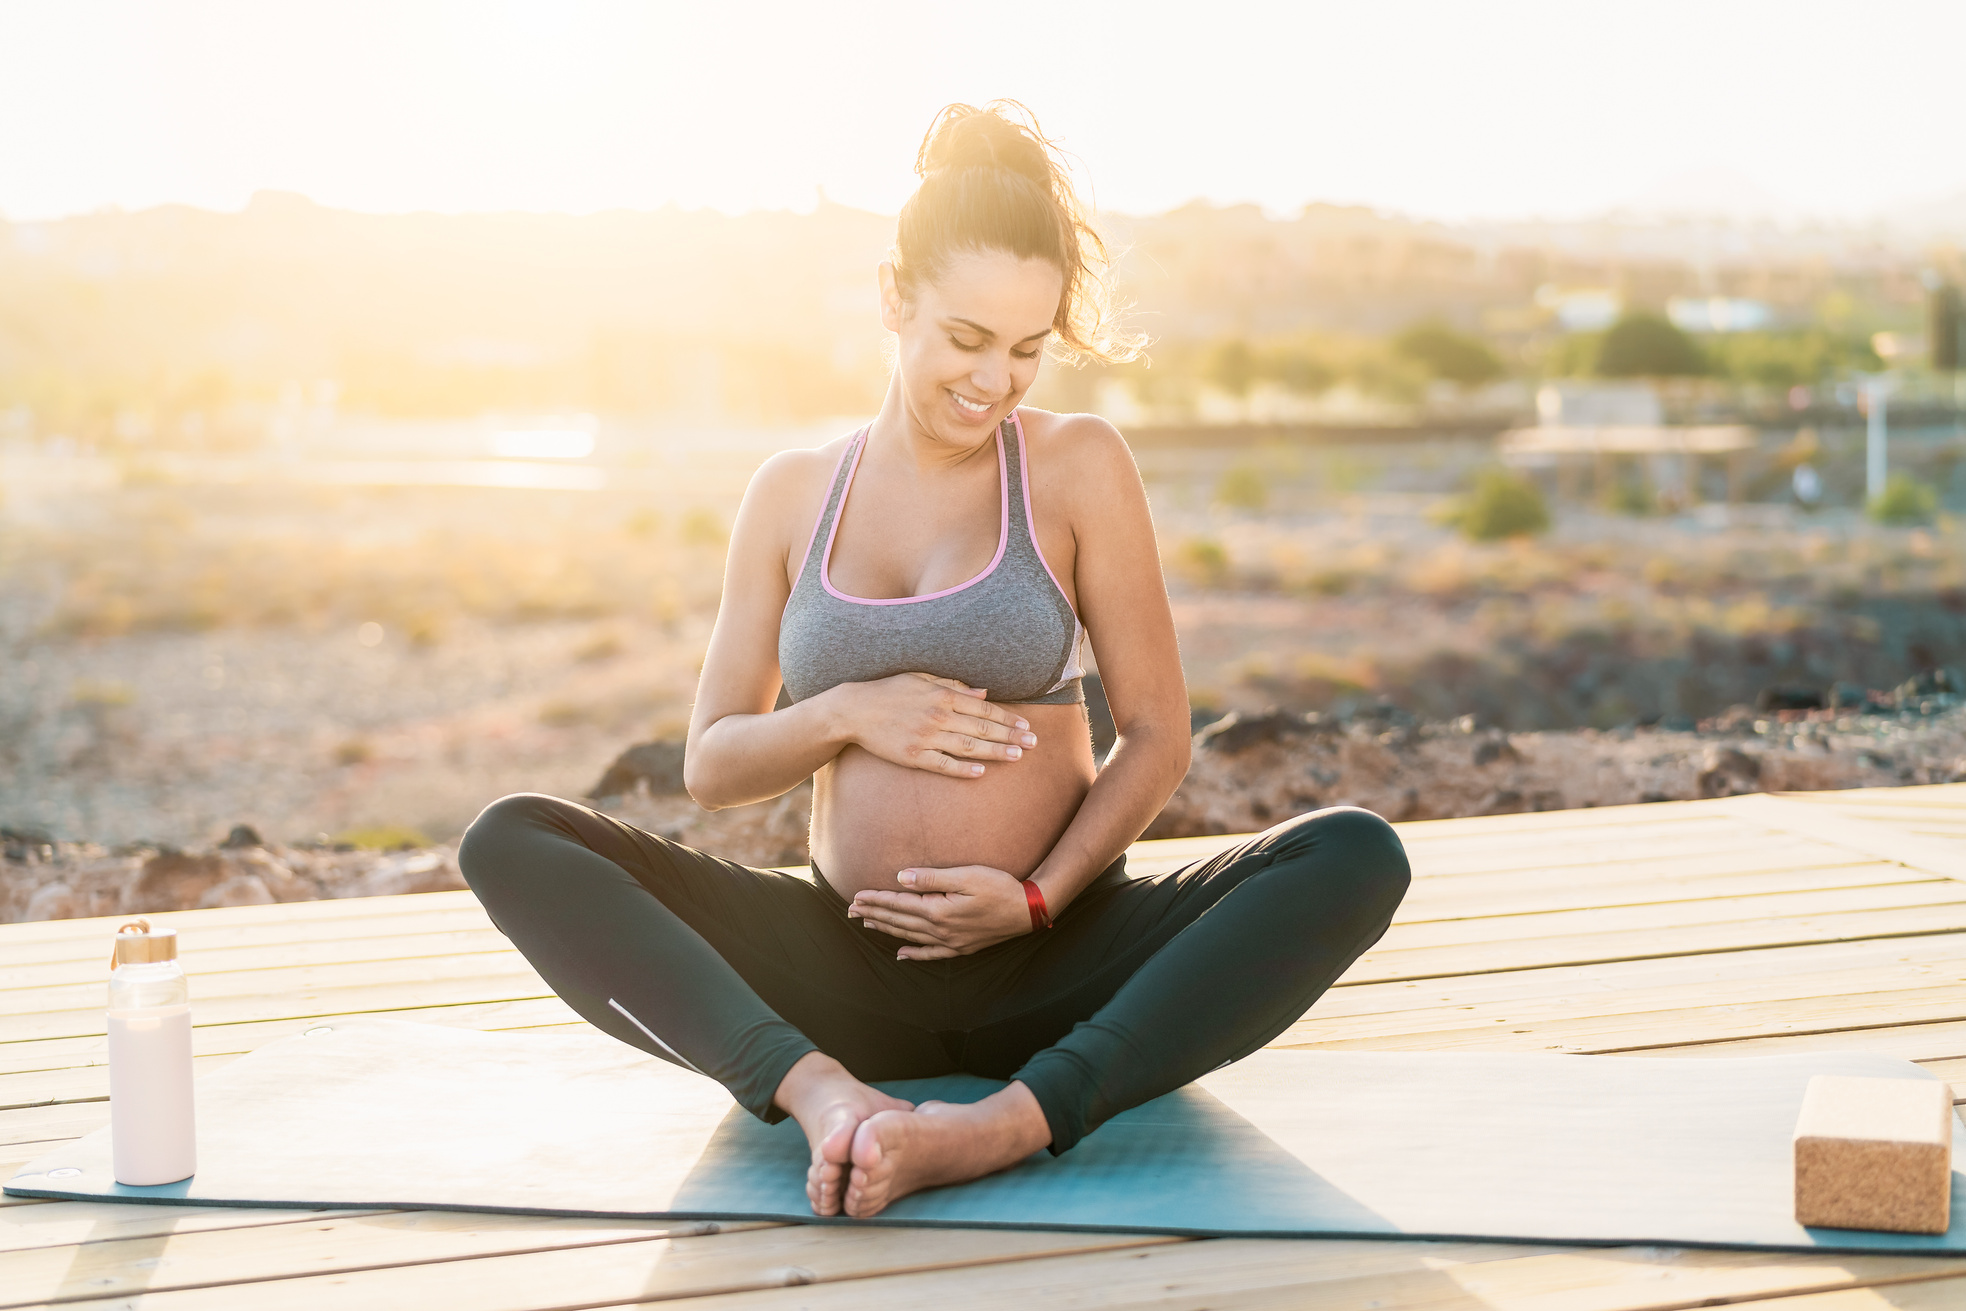 Pregnant Woman Massaging Belly While Exercising Outdoors